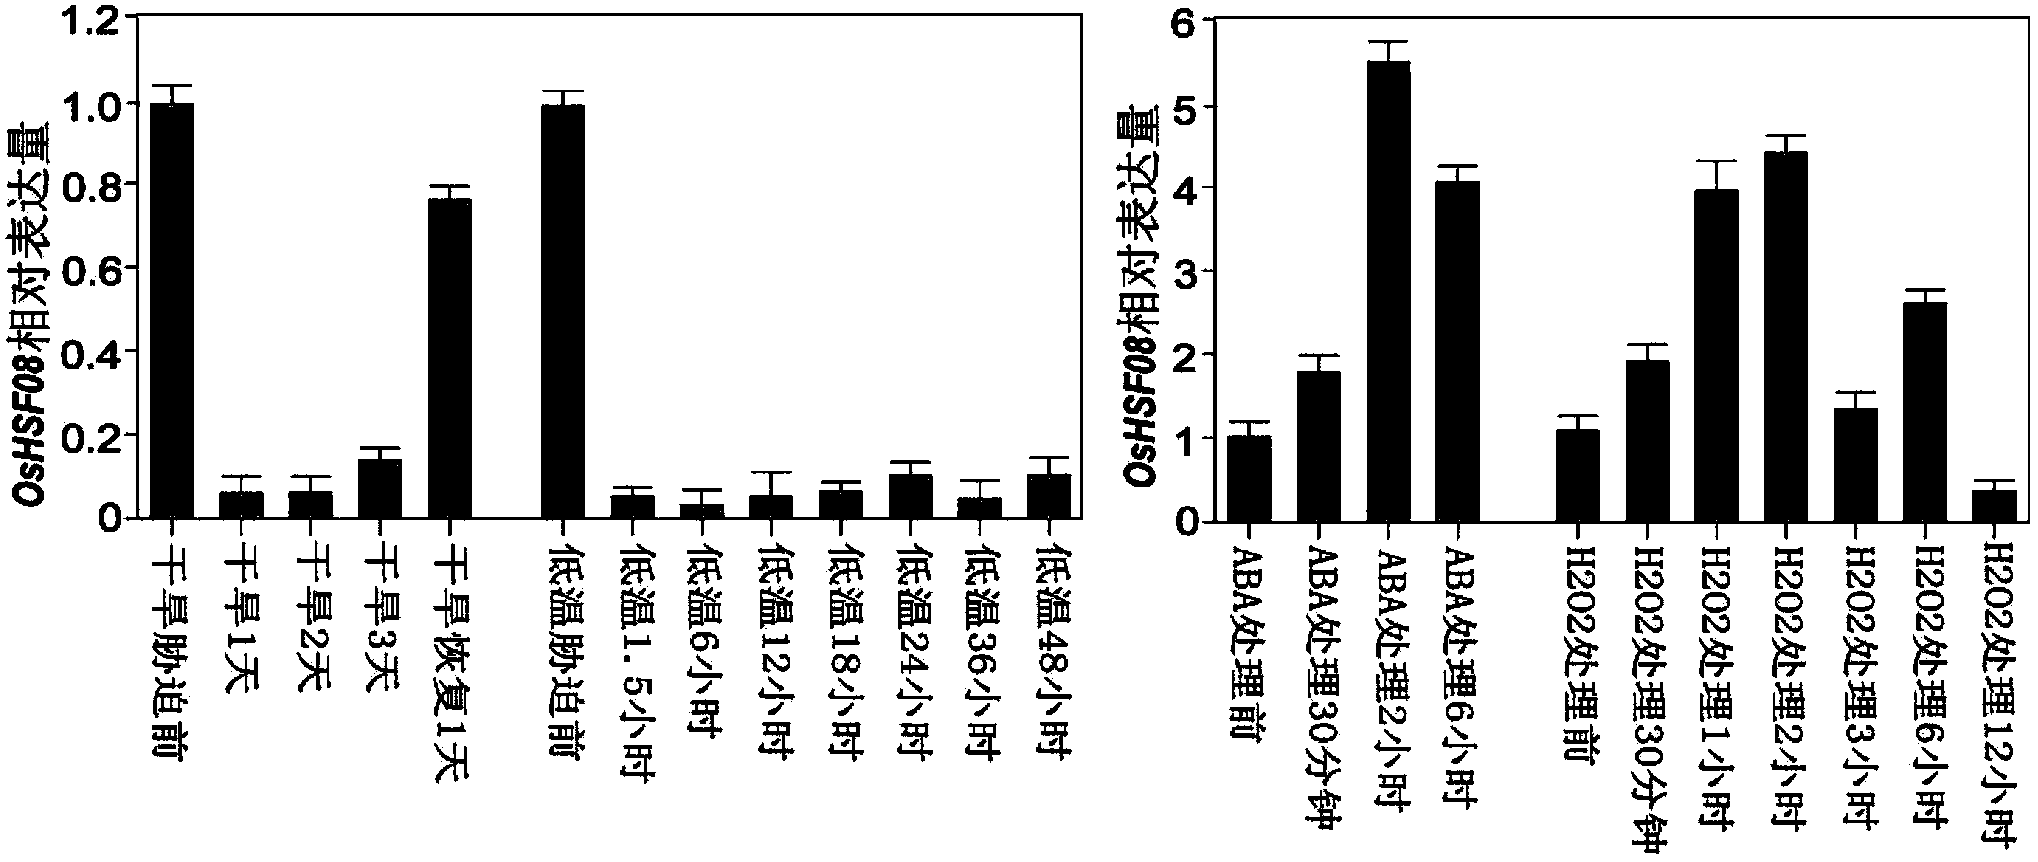 Application of OsHSF08 gene in controlling rice drought resistance